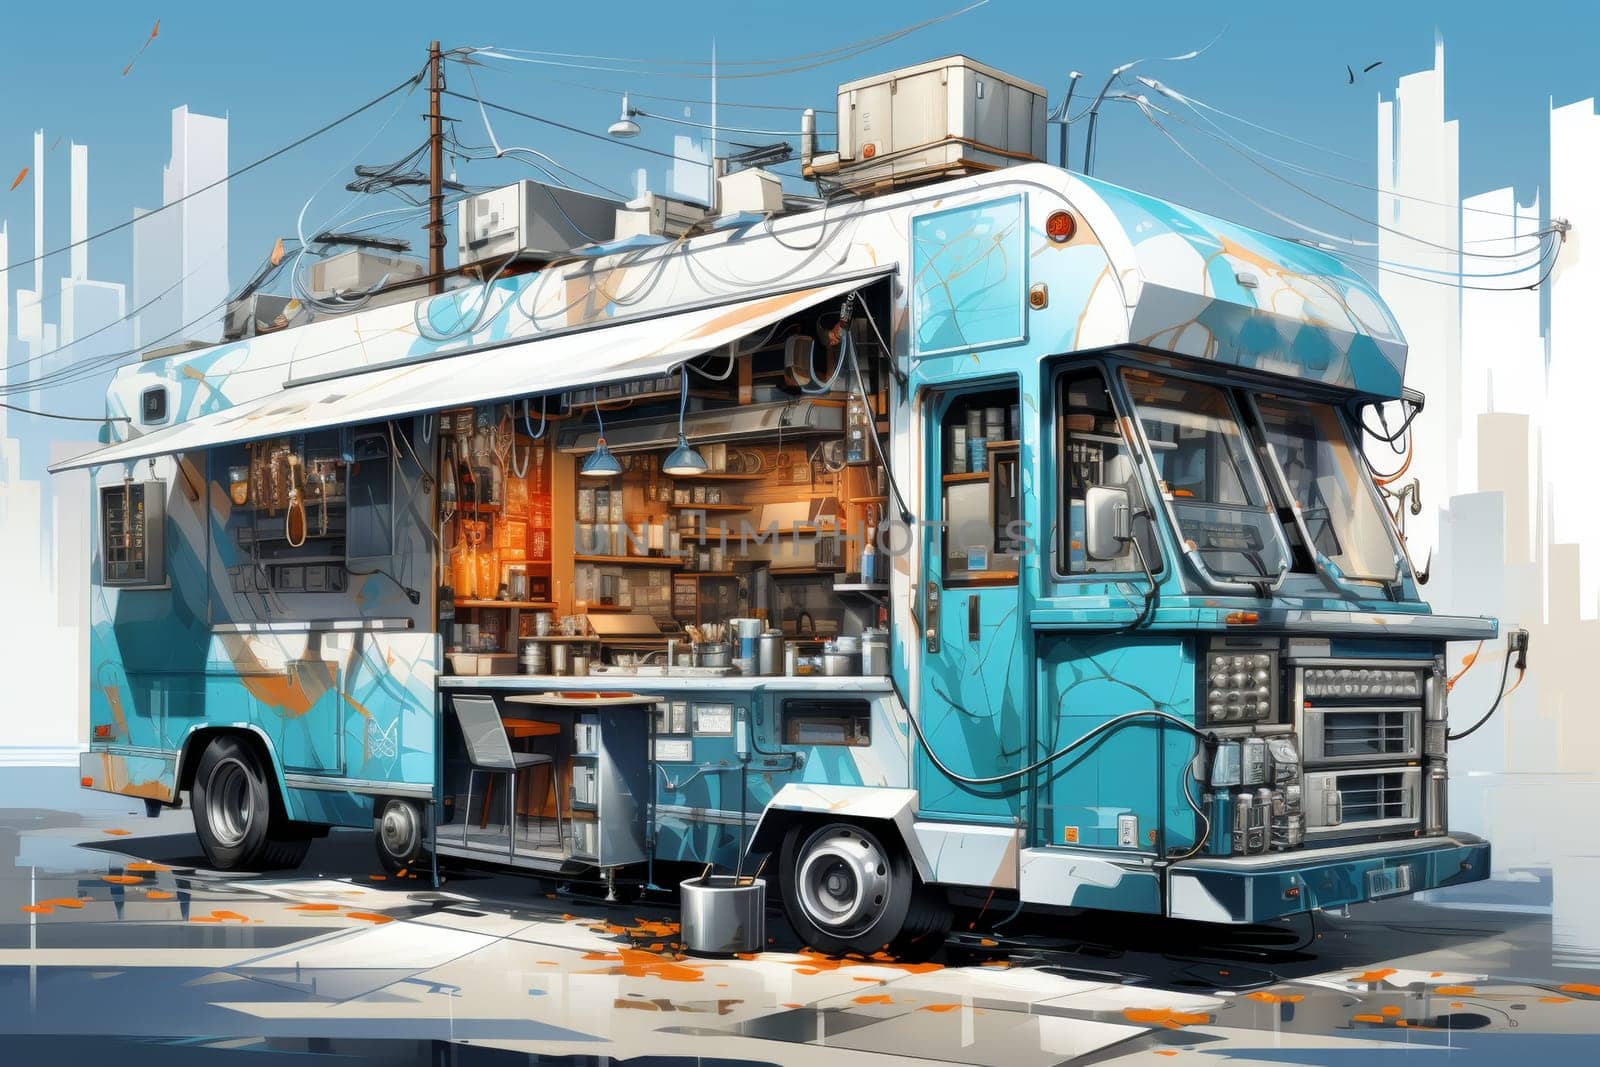 A van with street food. A food truck by Lobachad